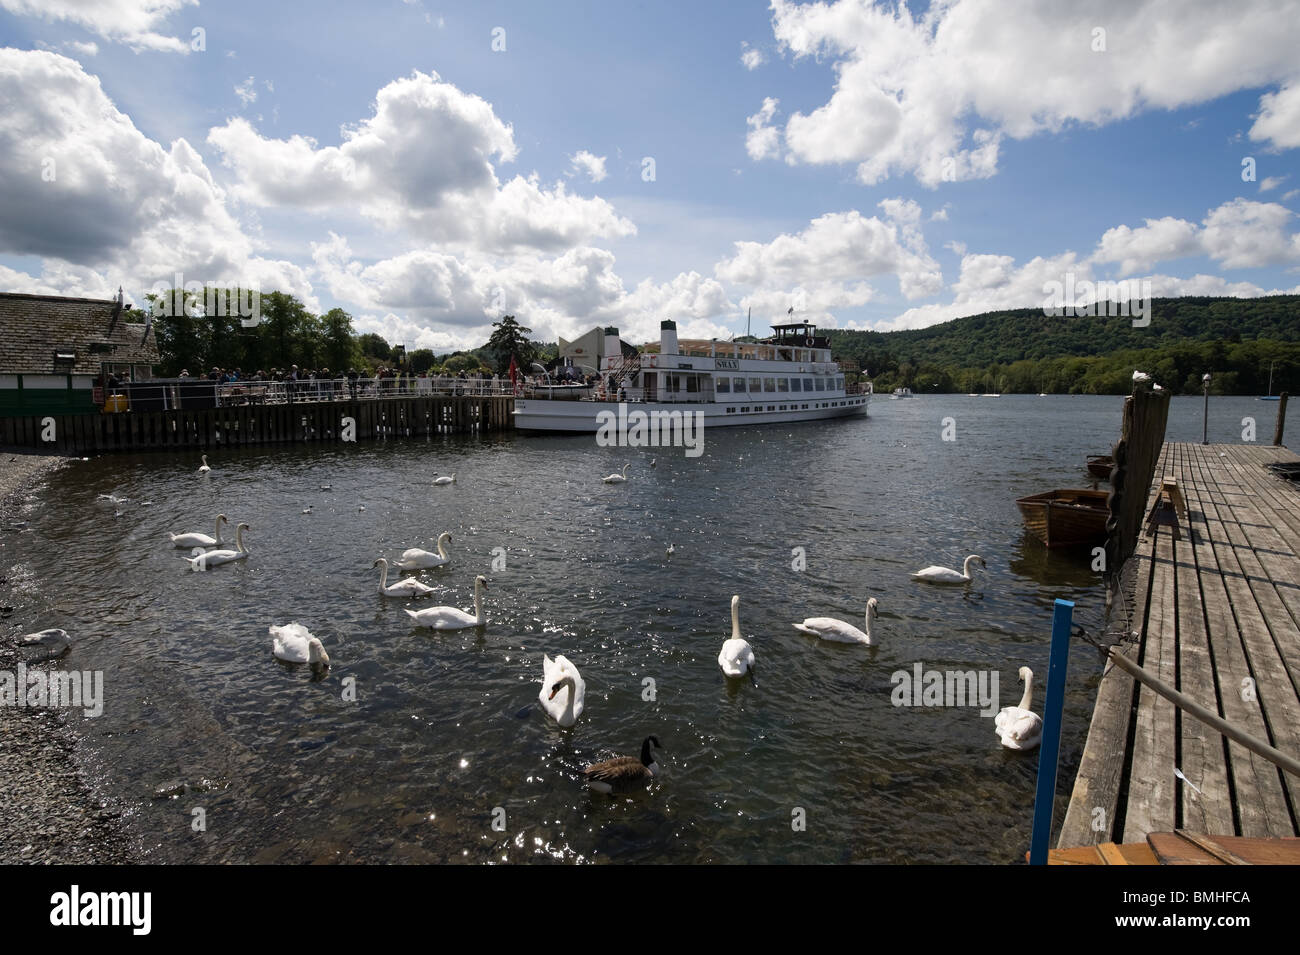 The Teal steamer boat docking at Bowness, Lake Windermere on a lovely sunny day. Stock Photo